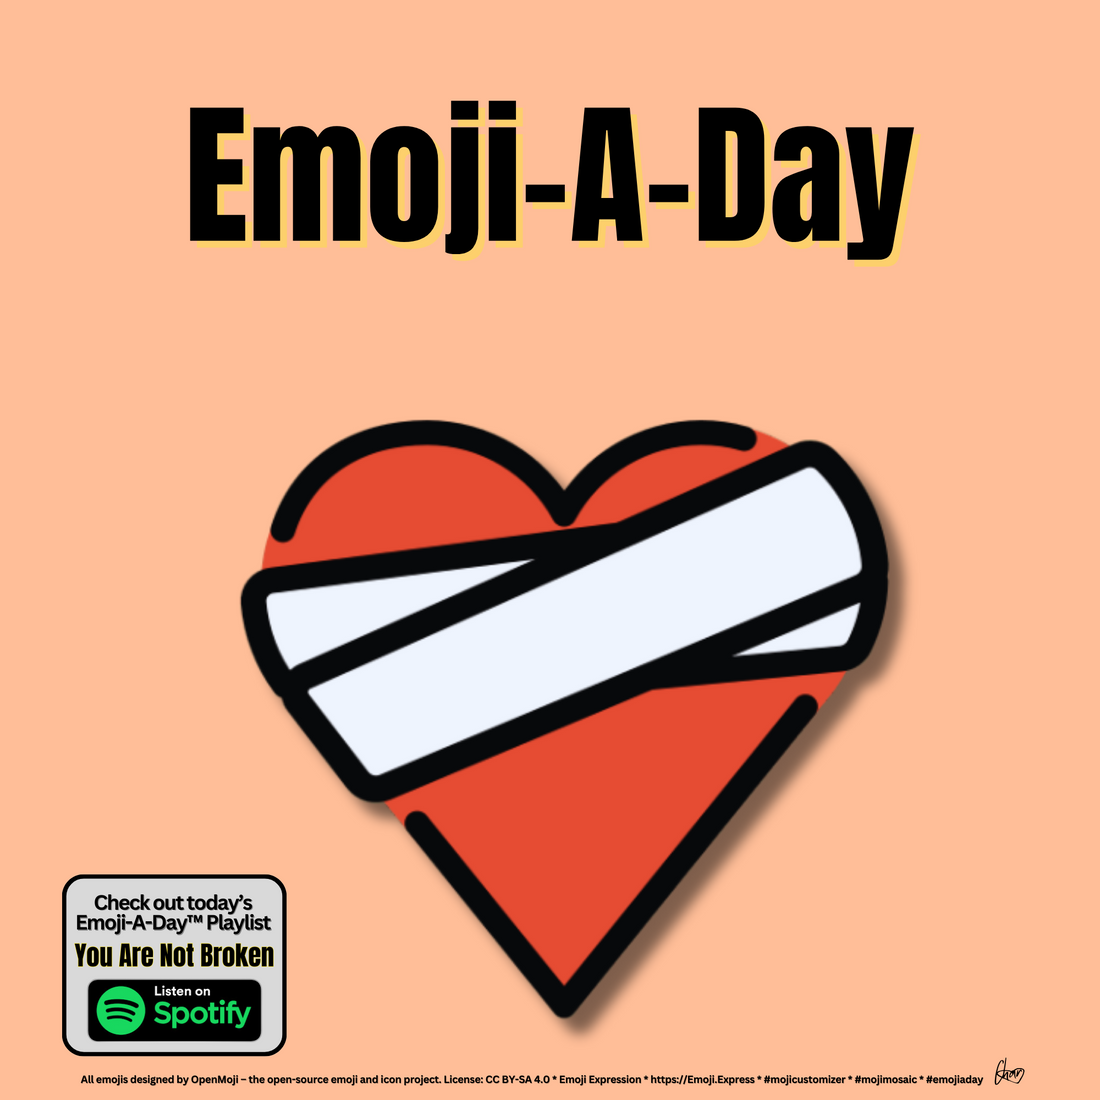 Emoij-A-Day theme with Mending Heart emoji and You Are Not Broken Spotify Playlist